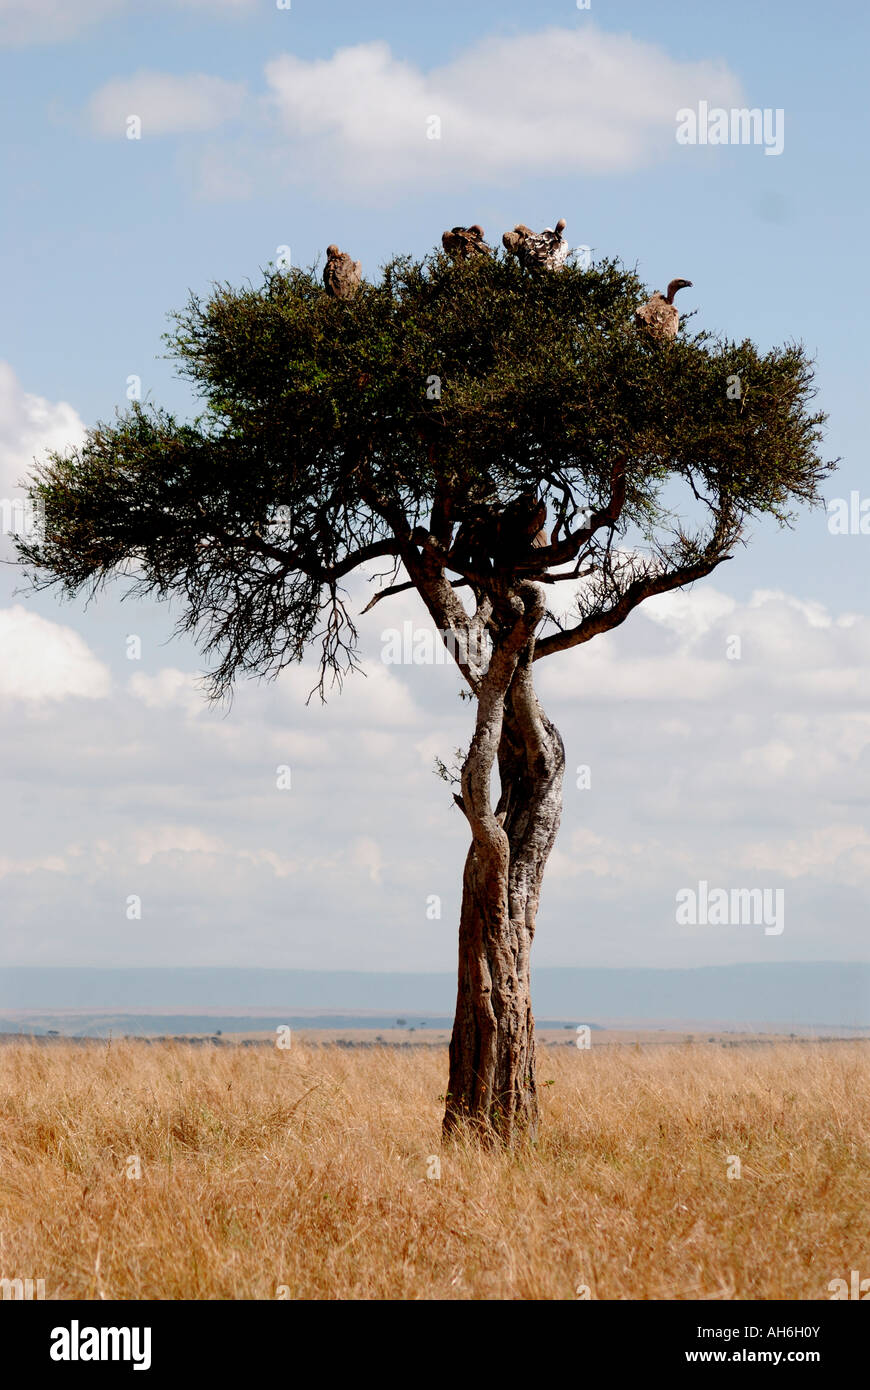 Vultures perched in a Balanites tree in the Masai Mara National Reserve Kenya East Africa Stock Photo